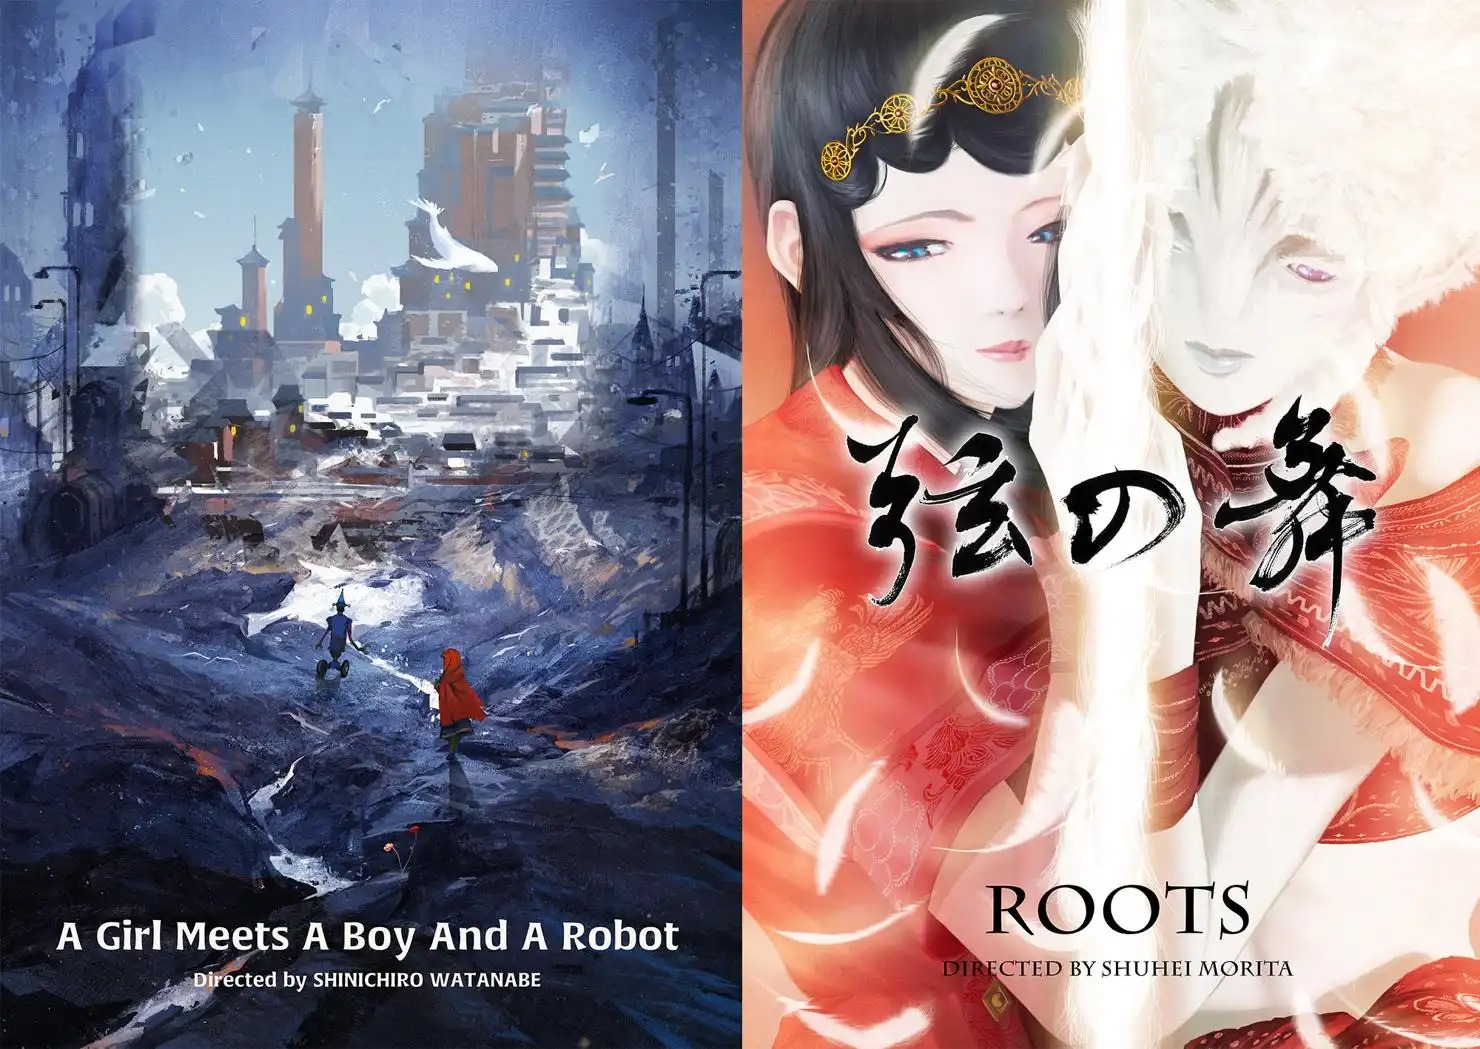 A Girl meets A Boy and A Robot/Roots visual